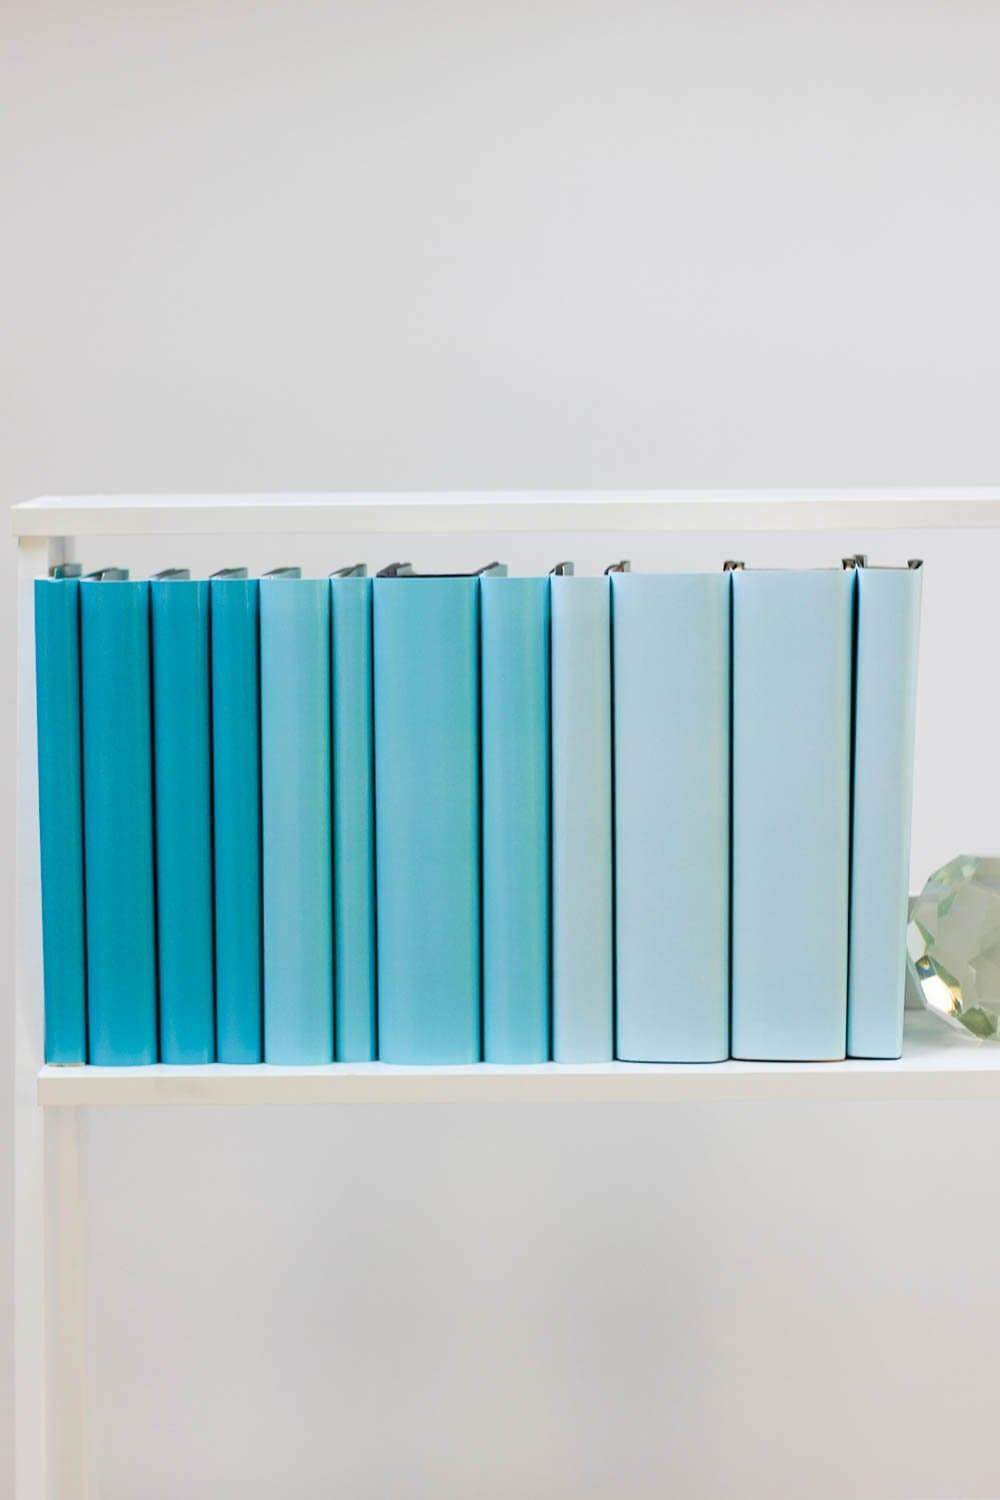 Set of styled blue books made with blue book covers